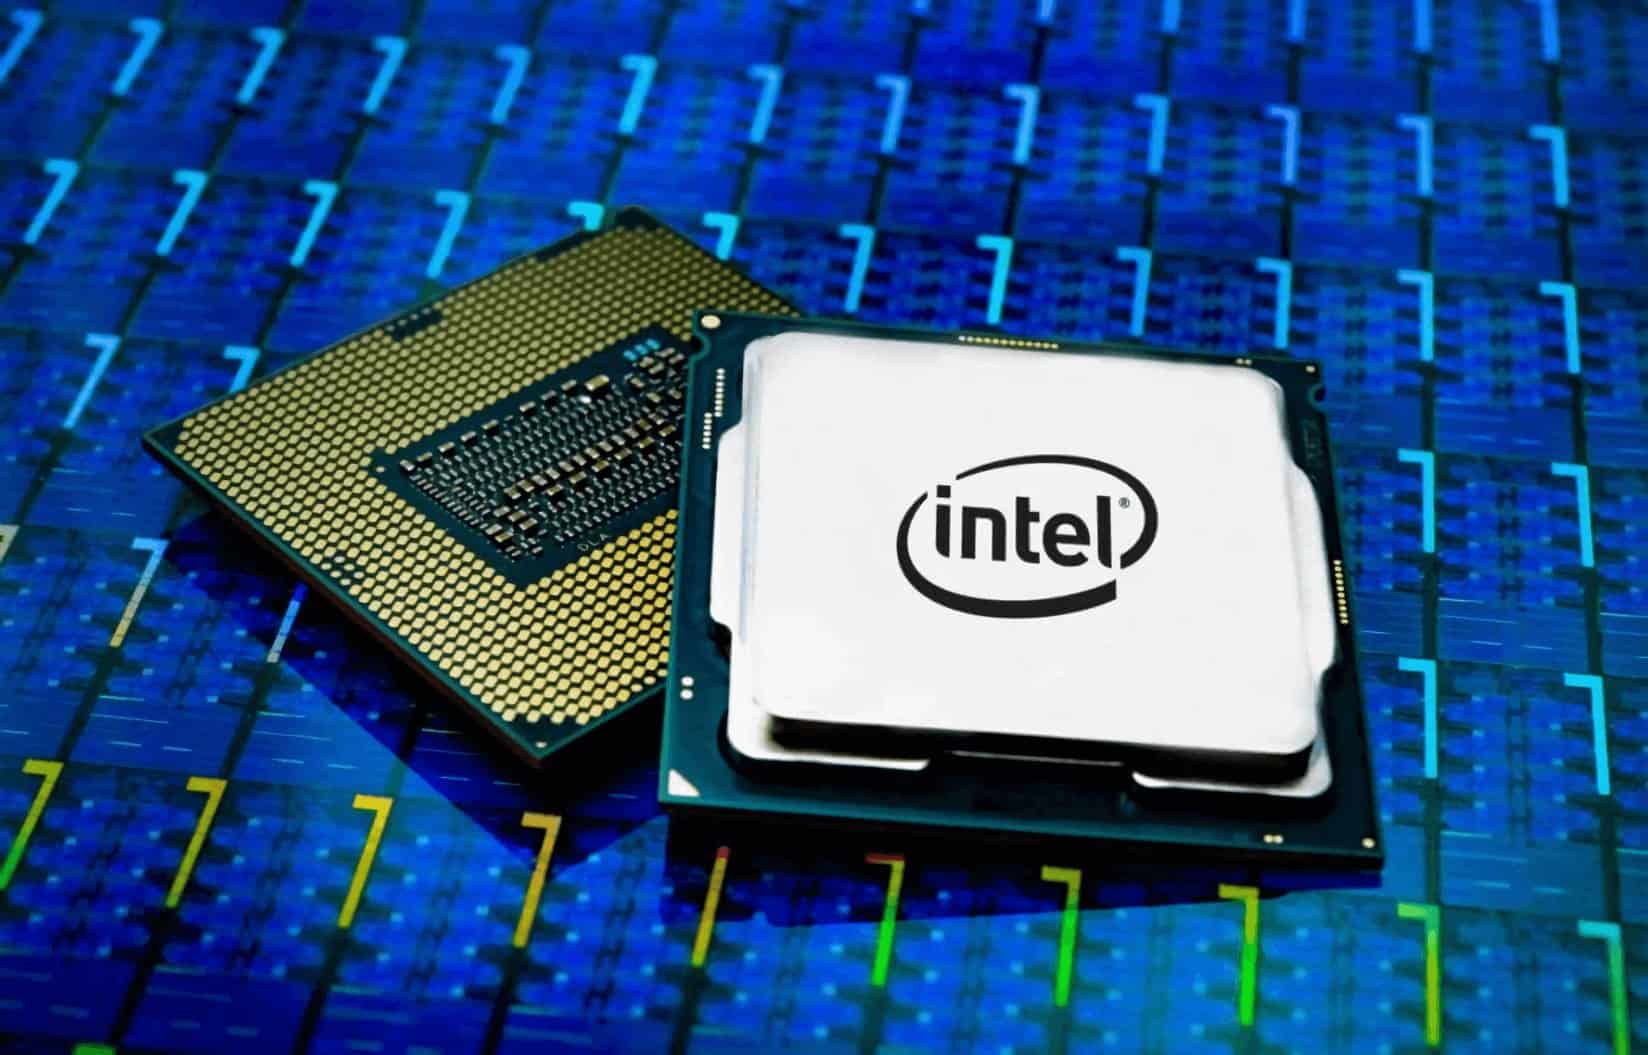 New Vulnerability Found in Intel Chipsets